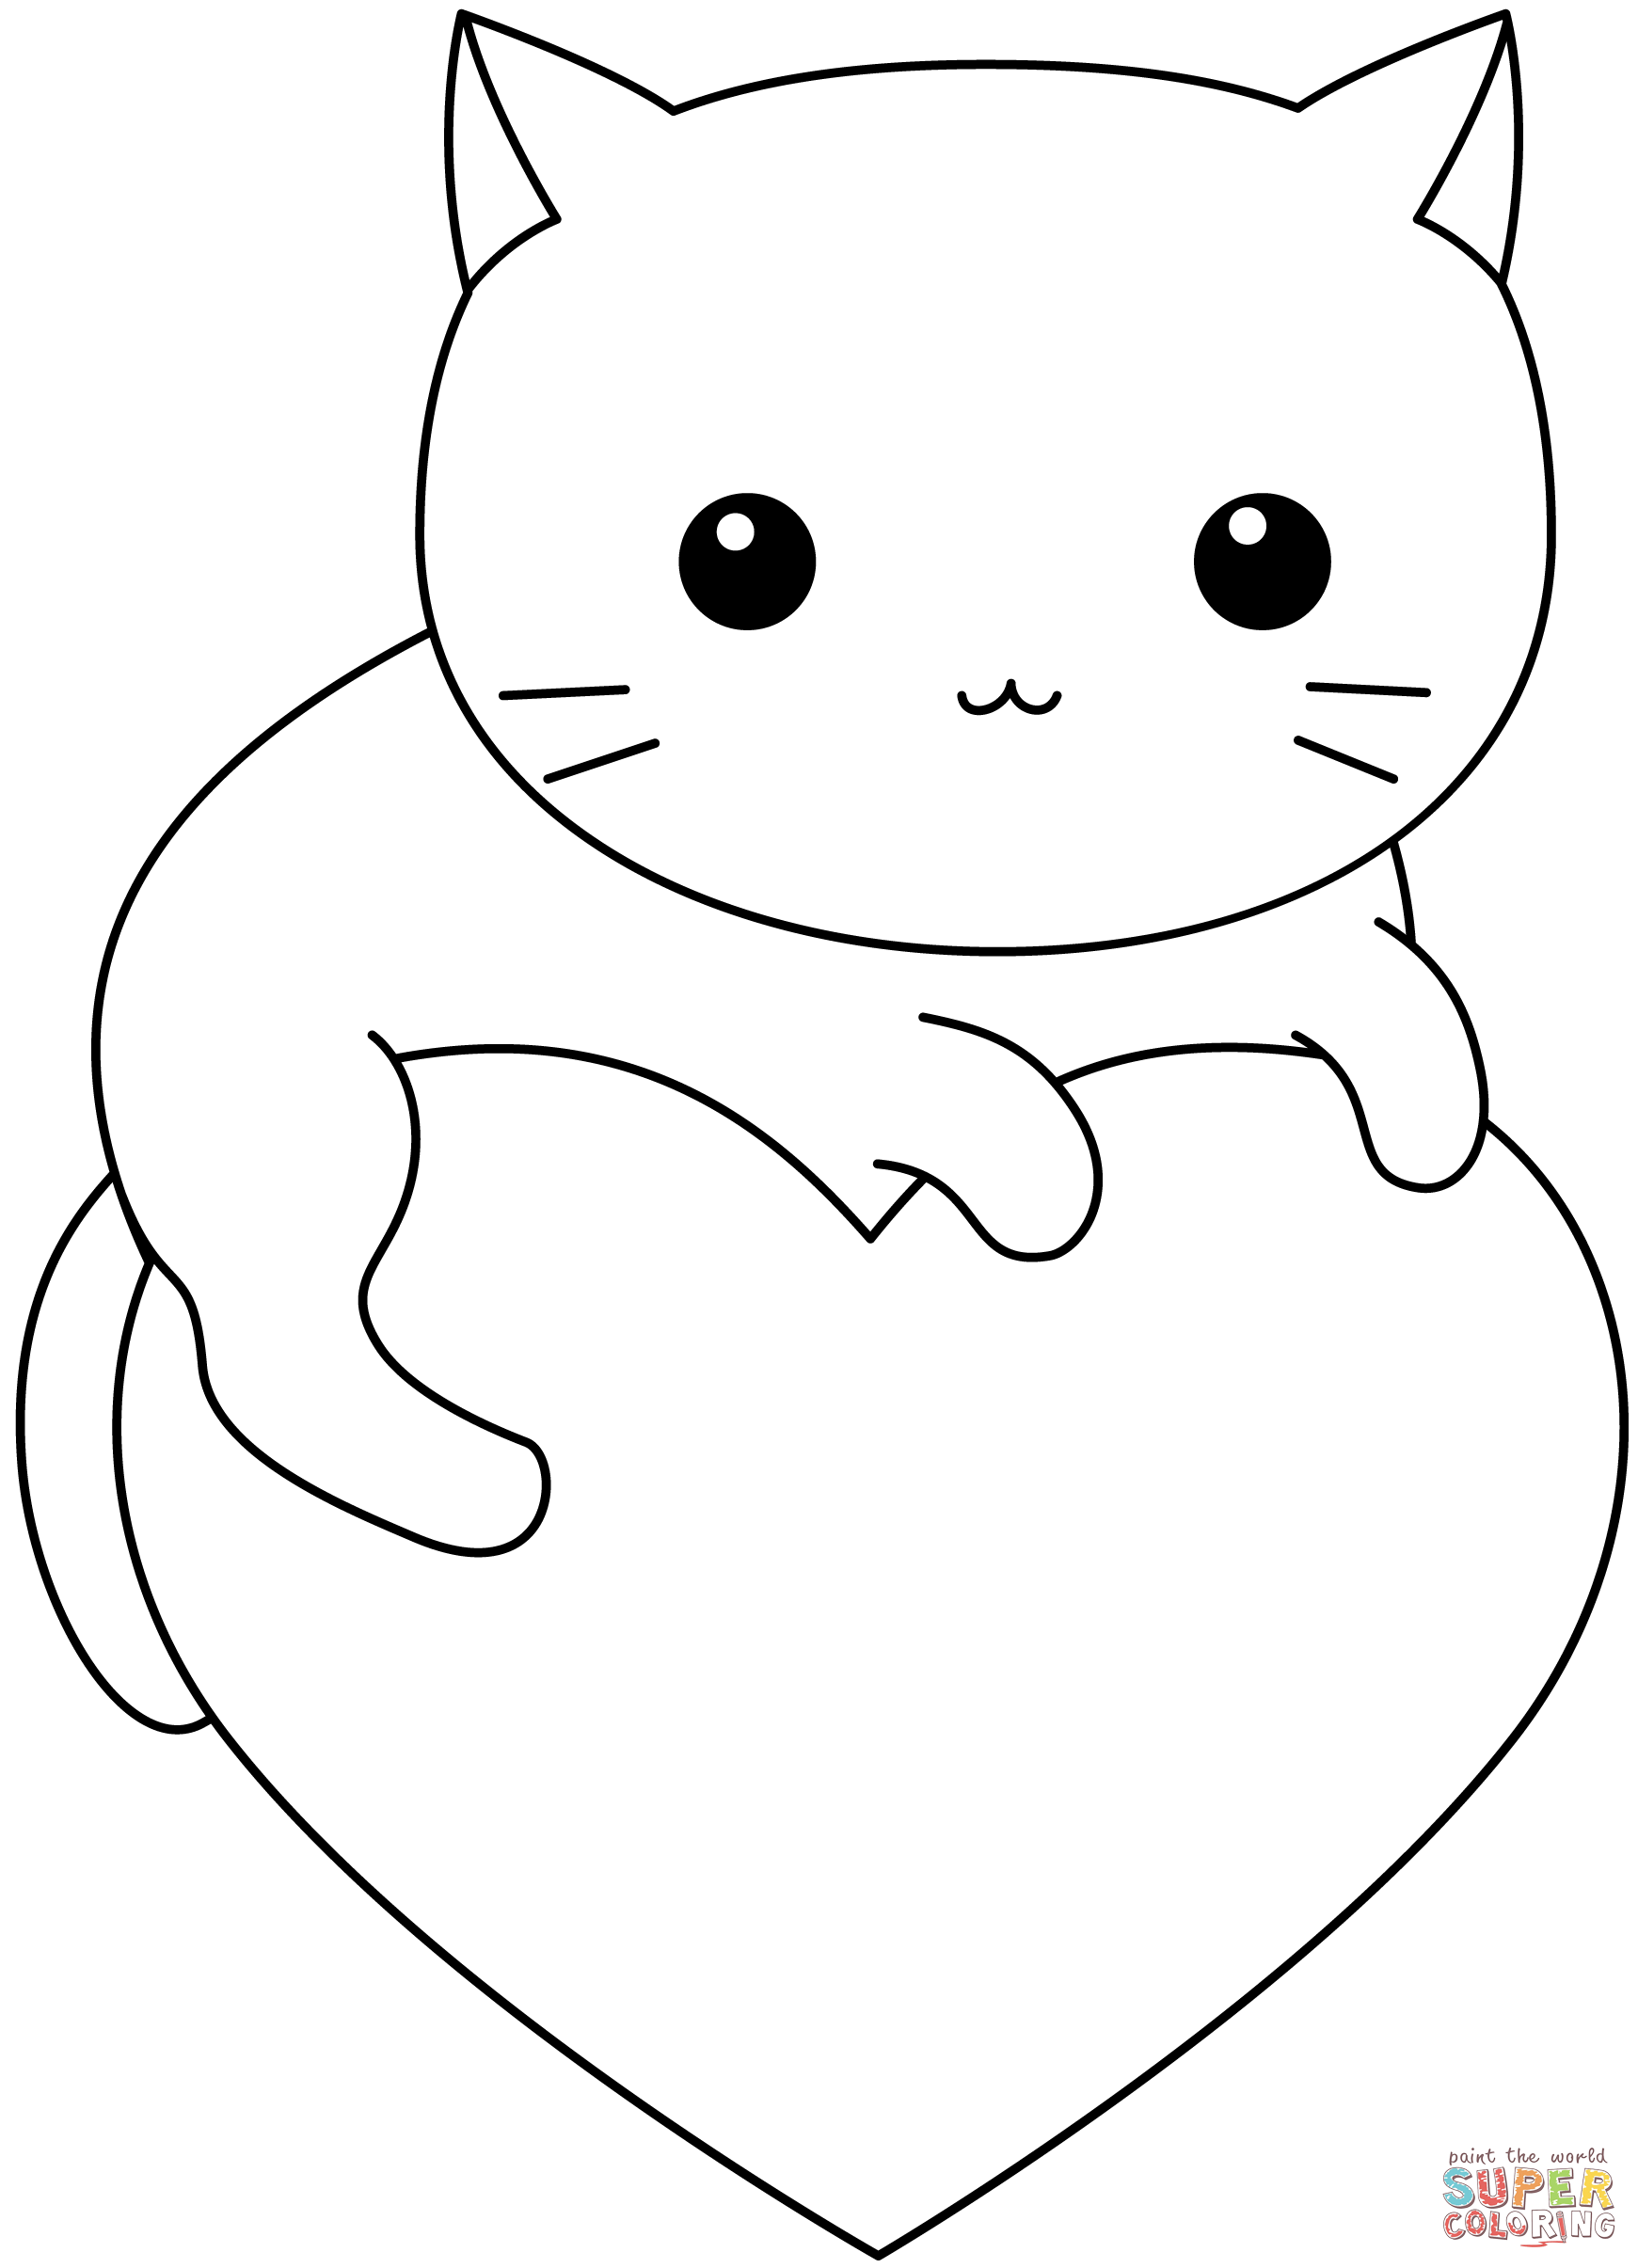 Kawaii Kitty on Heart coloring page | Free Printable Coloring Pages